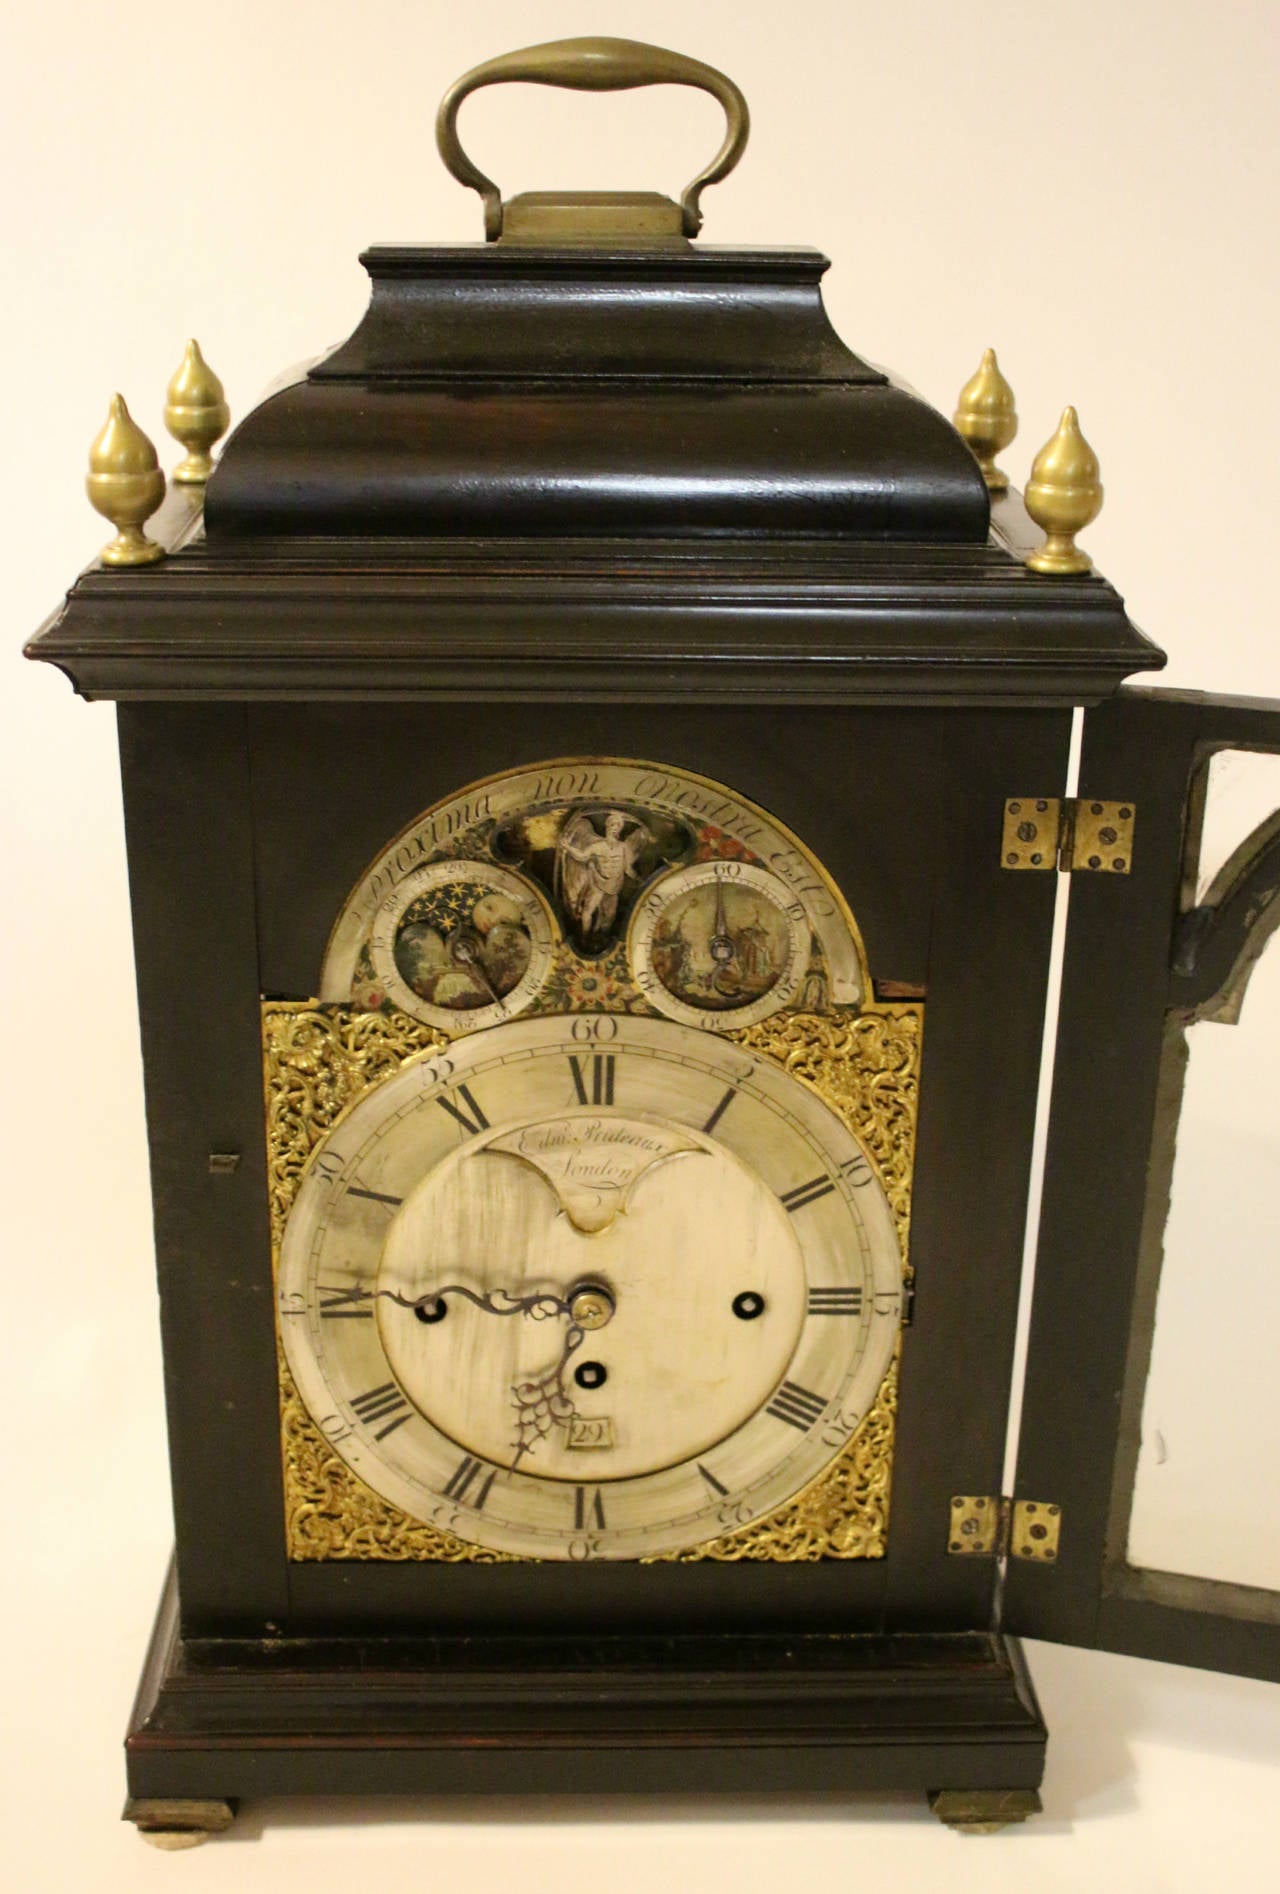 Mid-18th century ebonized bracket clock by Edmund Prideaux, who worked in London between 1743 and 1790 and is particularly respected for the Fine cylinder watches that bear his name.
Inverted bell top centered by a handle over circular and shaped